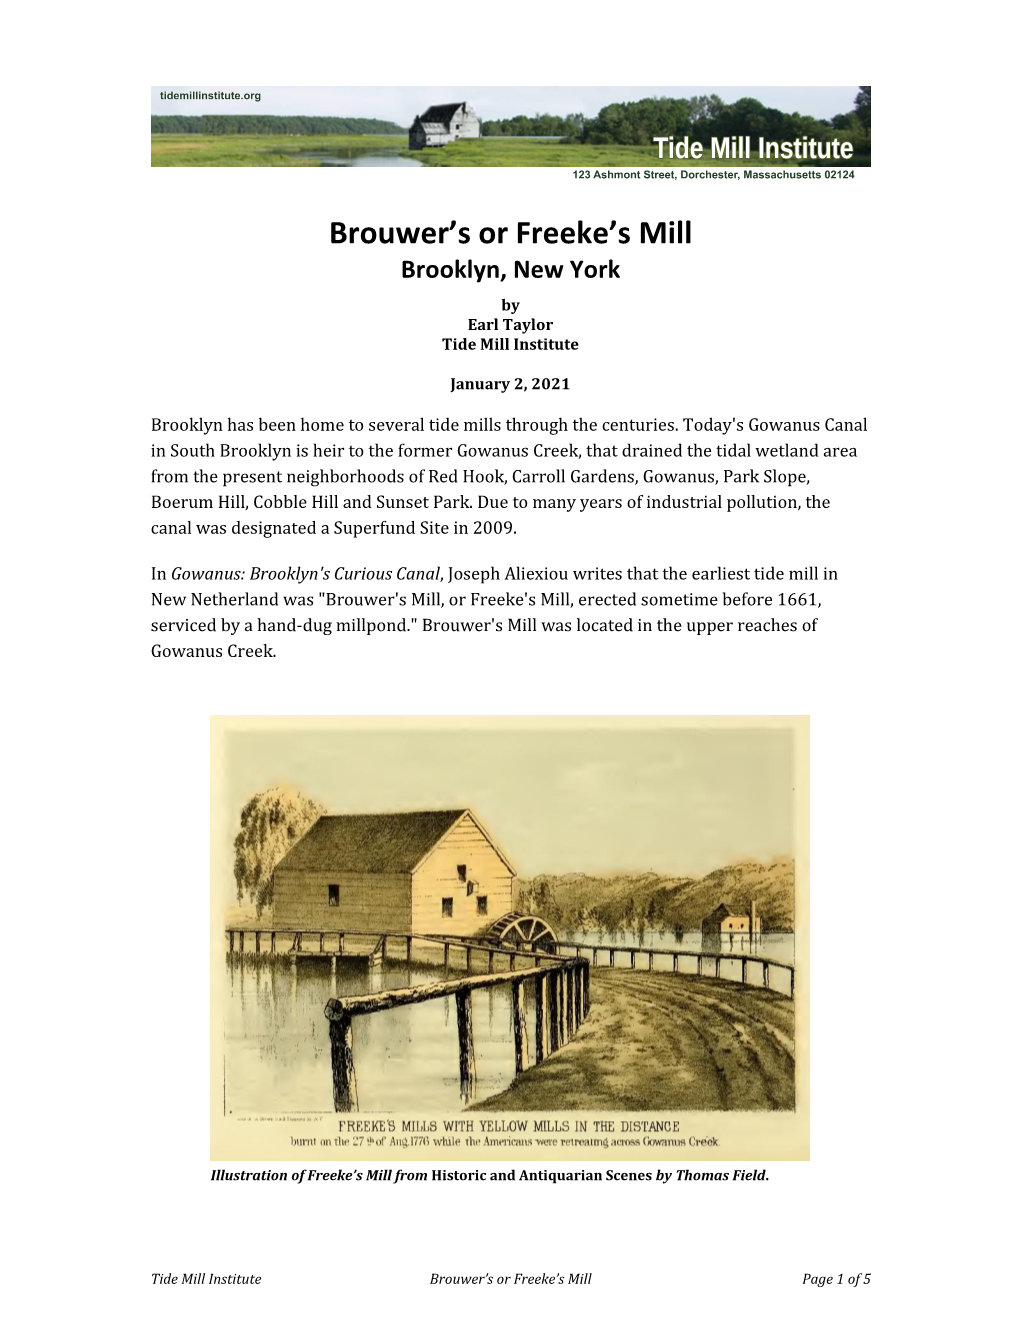 Brouwer's Or Freeke's Mill